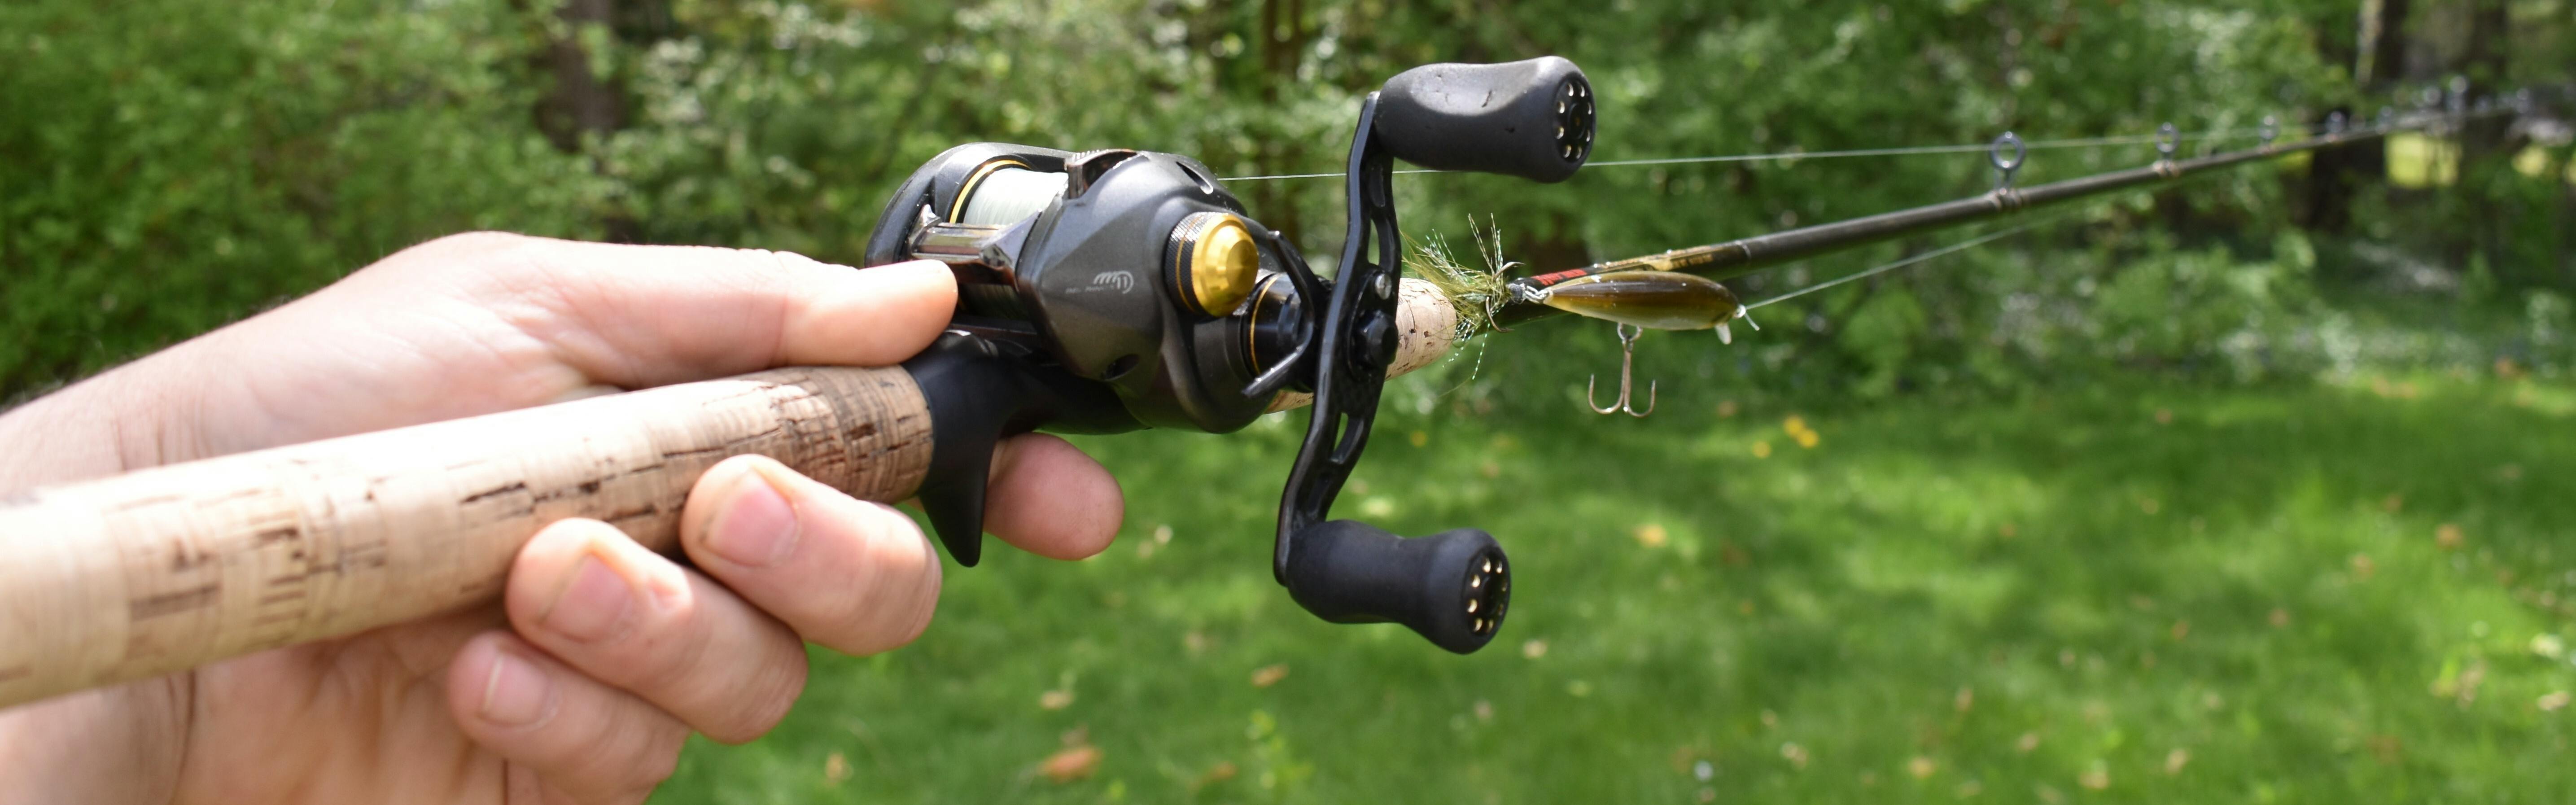 The author holds out a baitcasting reel over a lush lawn.